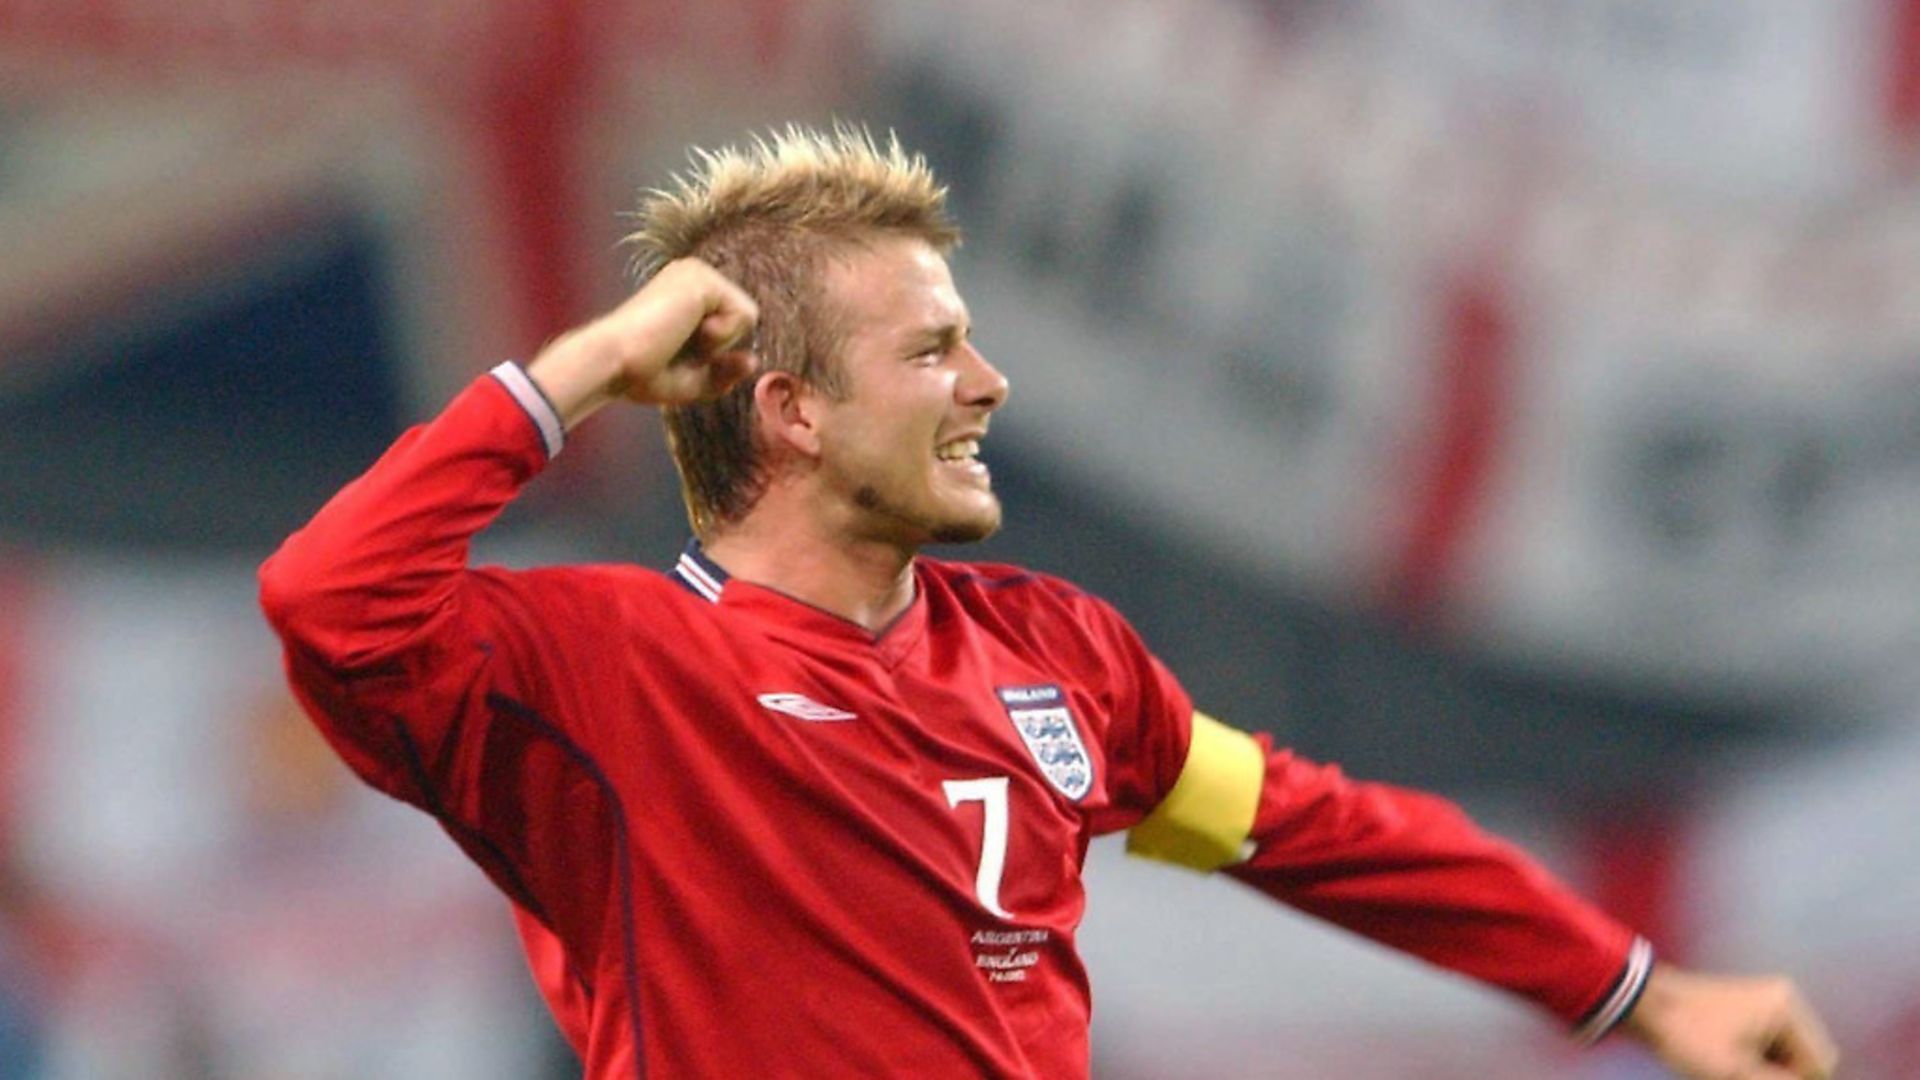 David Beckham redeemed his England career. Adopting his never-give-up attitude may yet scupper Brexit Photo: PA - Credit: DPA/PA Images